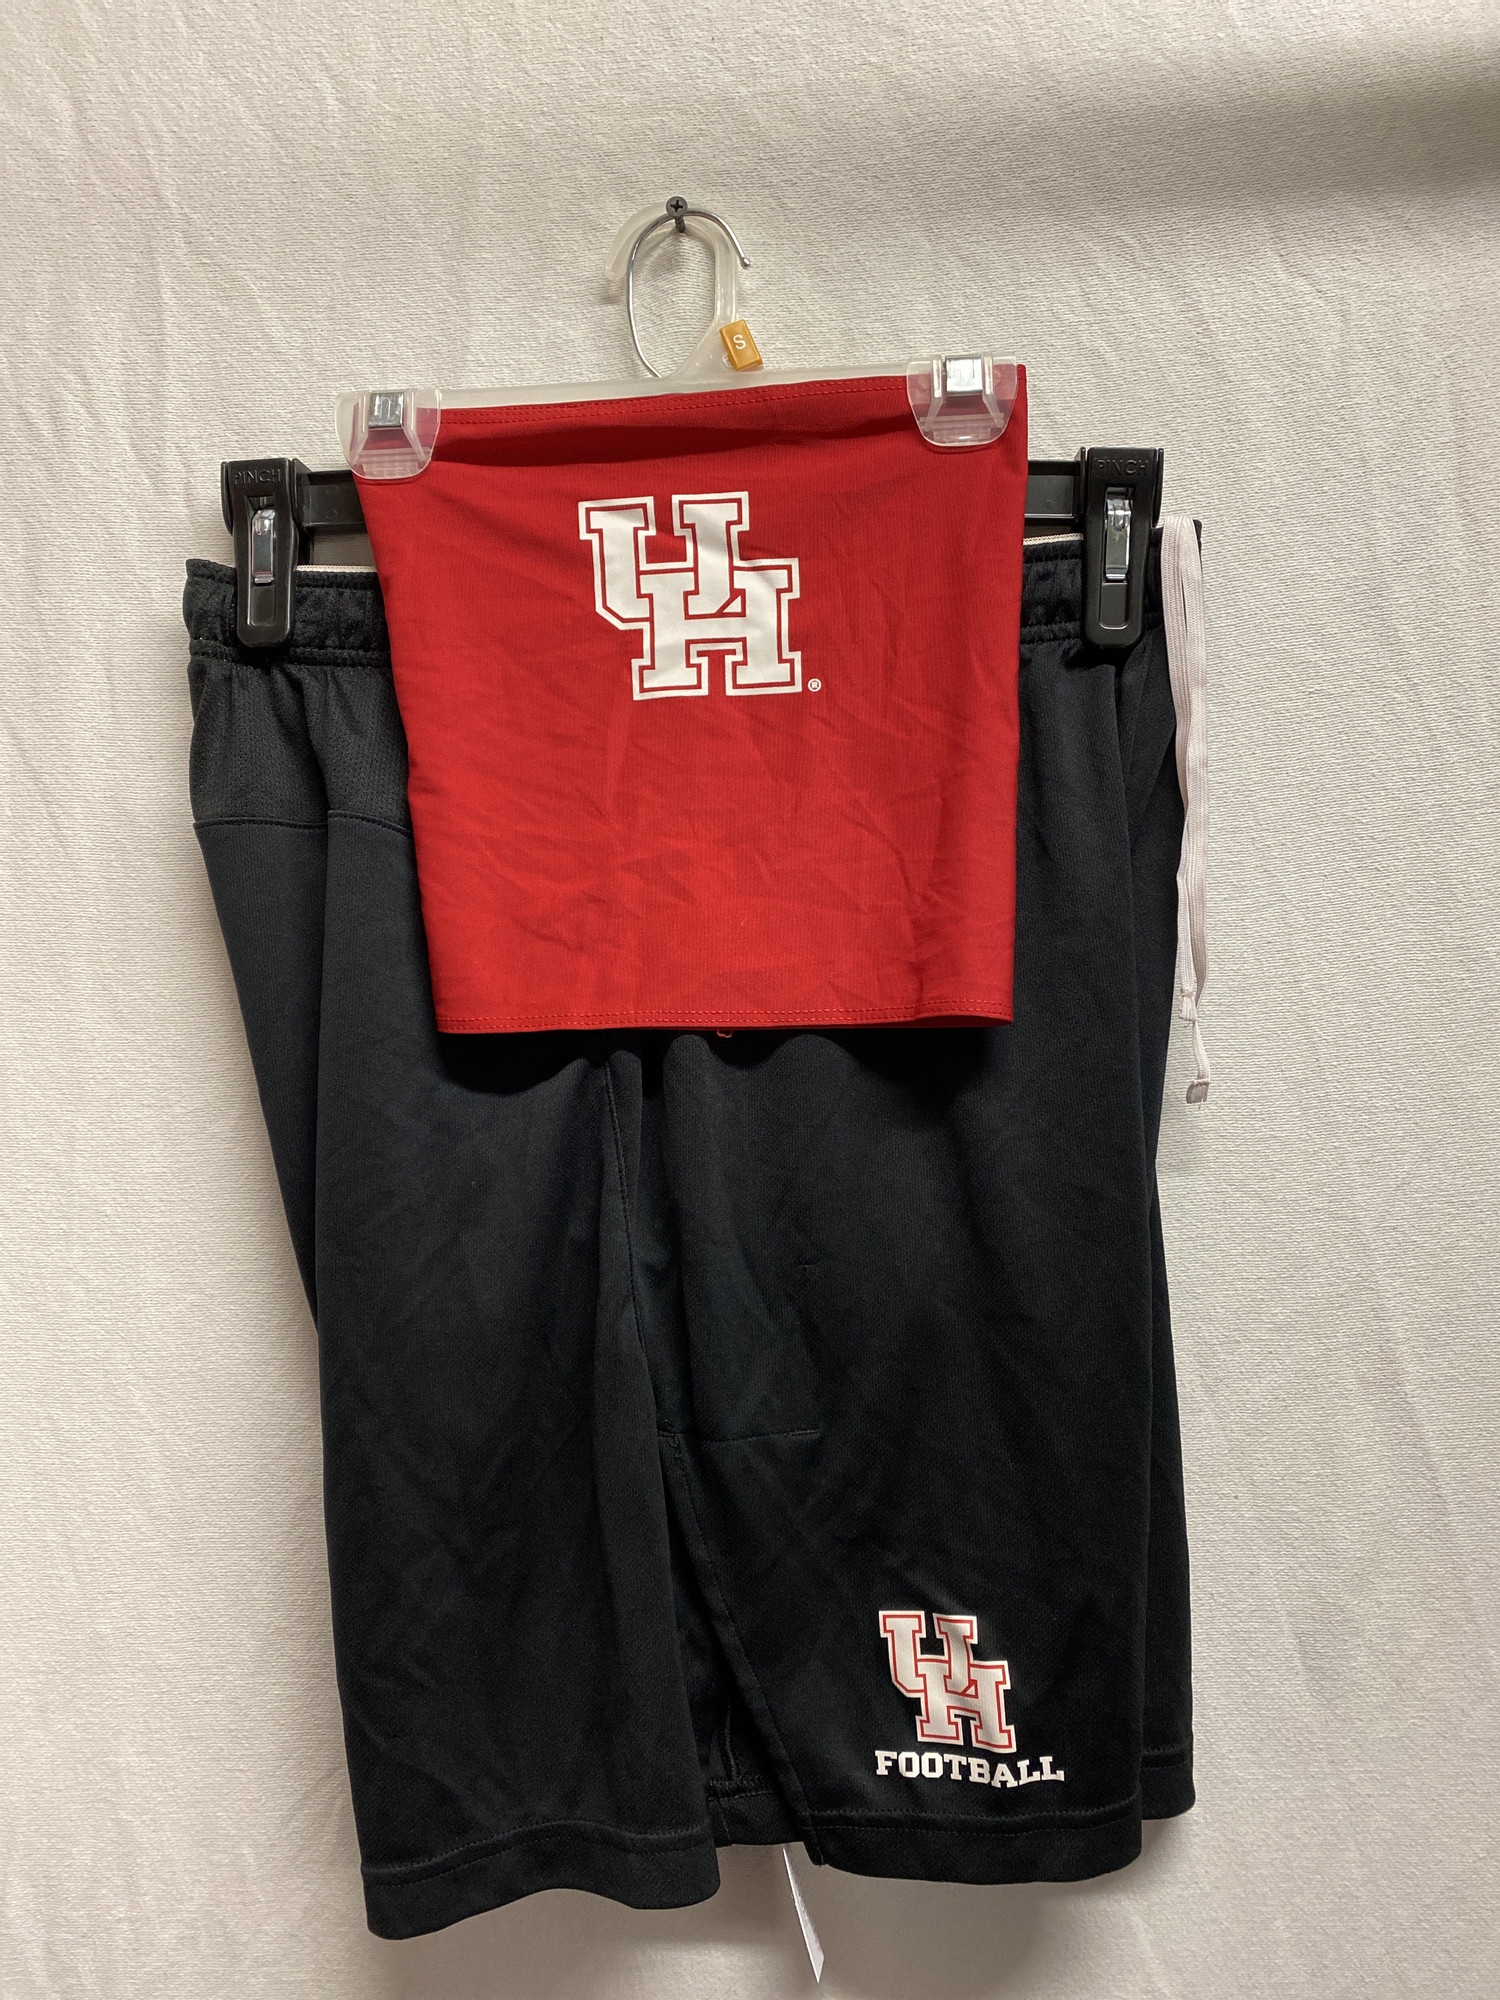 Houston Cougars Combo, Black, Size: Large
shorts - black size large
pilling and fuzz, wrinkled, faded, discoloring,
drawstring and elastic waist, pockets (No), screen pressed team logo and embroidered brand logo
Headband - red size L/XL by Badger sport
wrinkled and in used condition